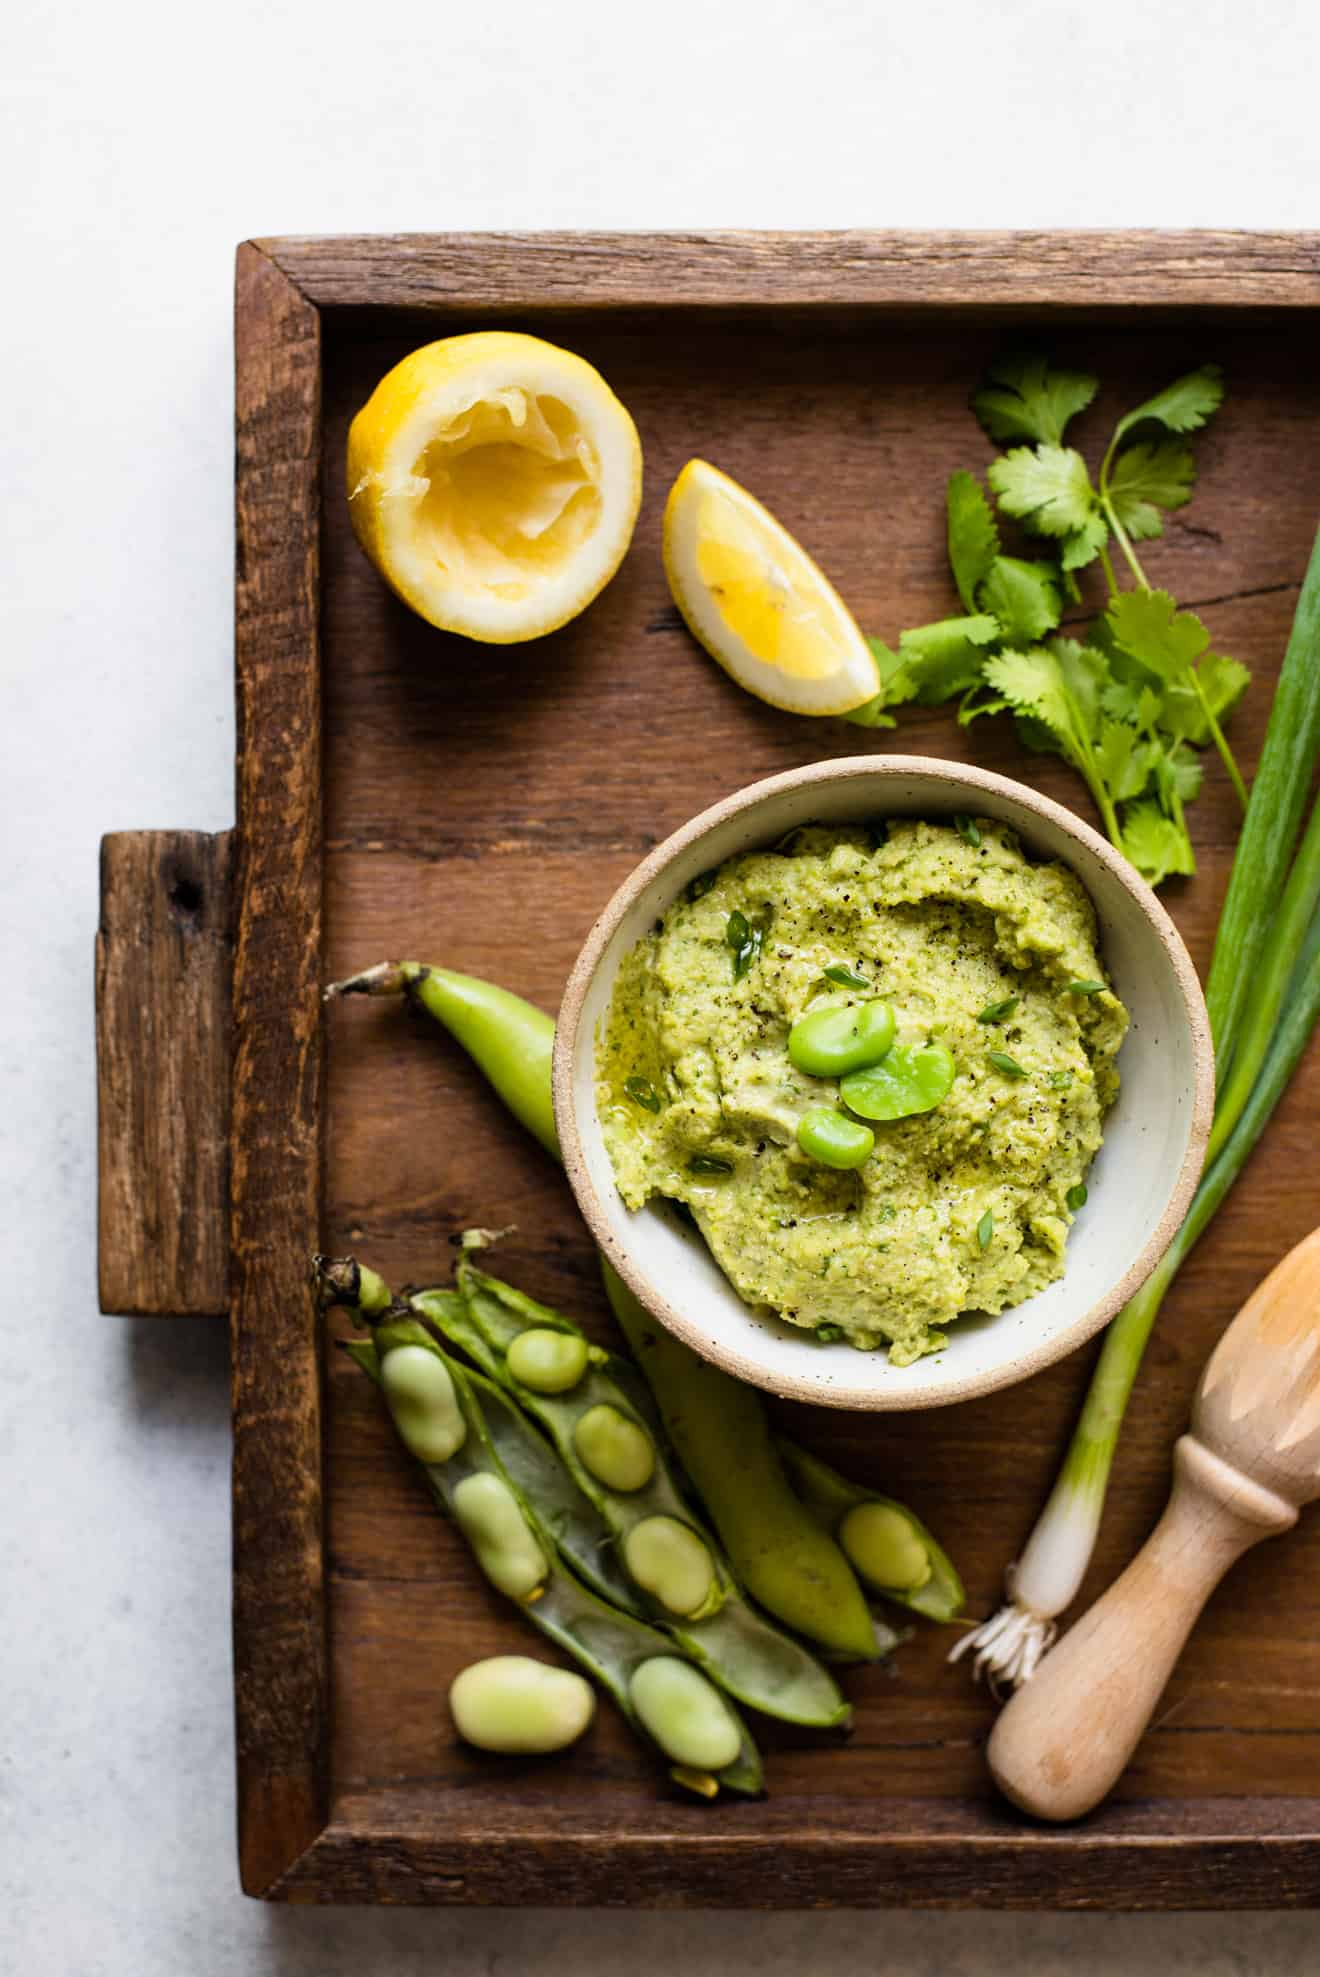 Fava Bean Dip - a simple vegan dip that is great as a snack, spread for wraps or pastas!